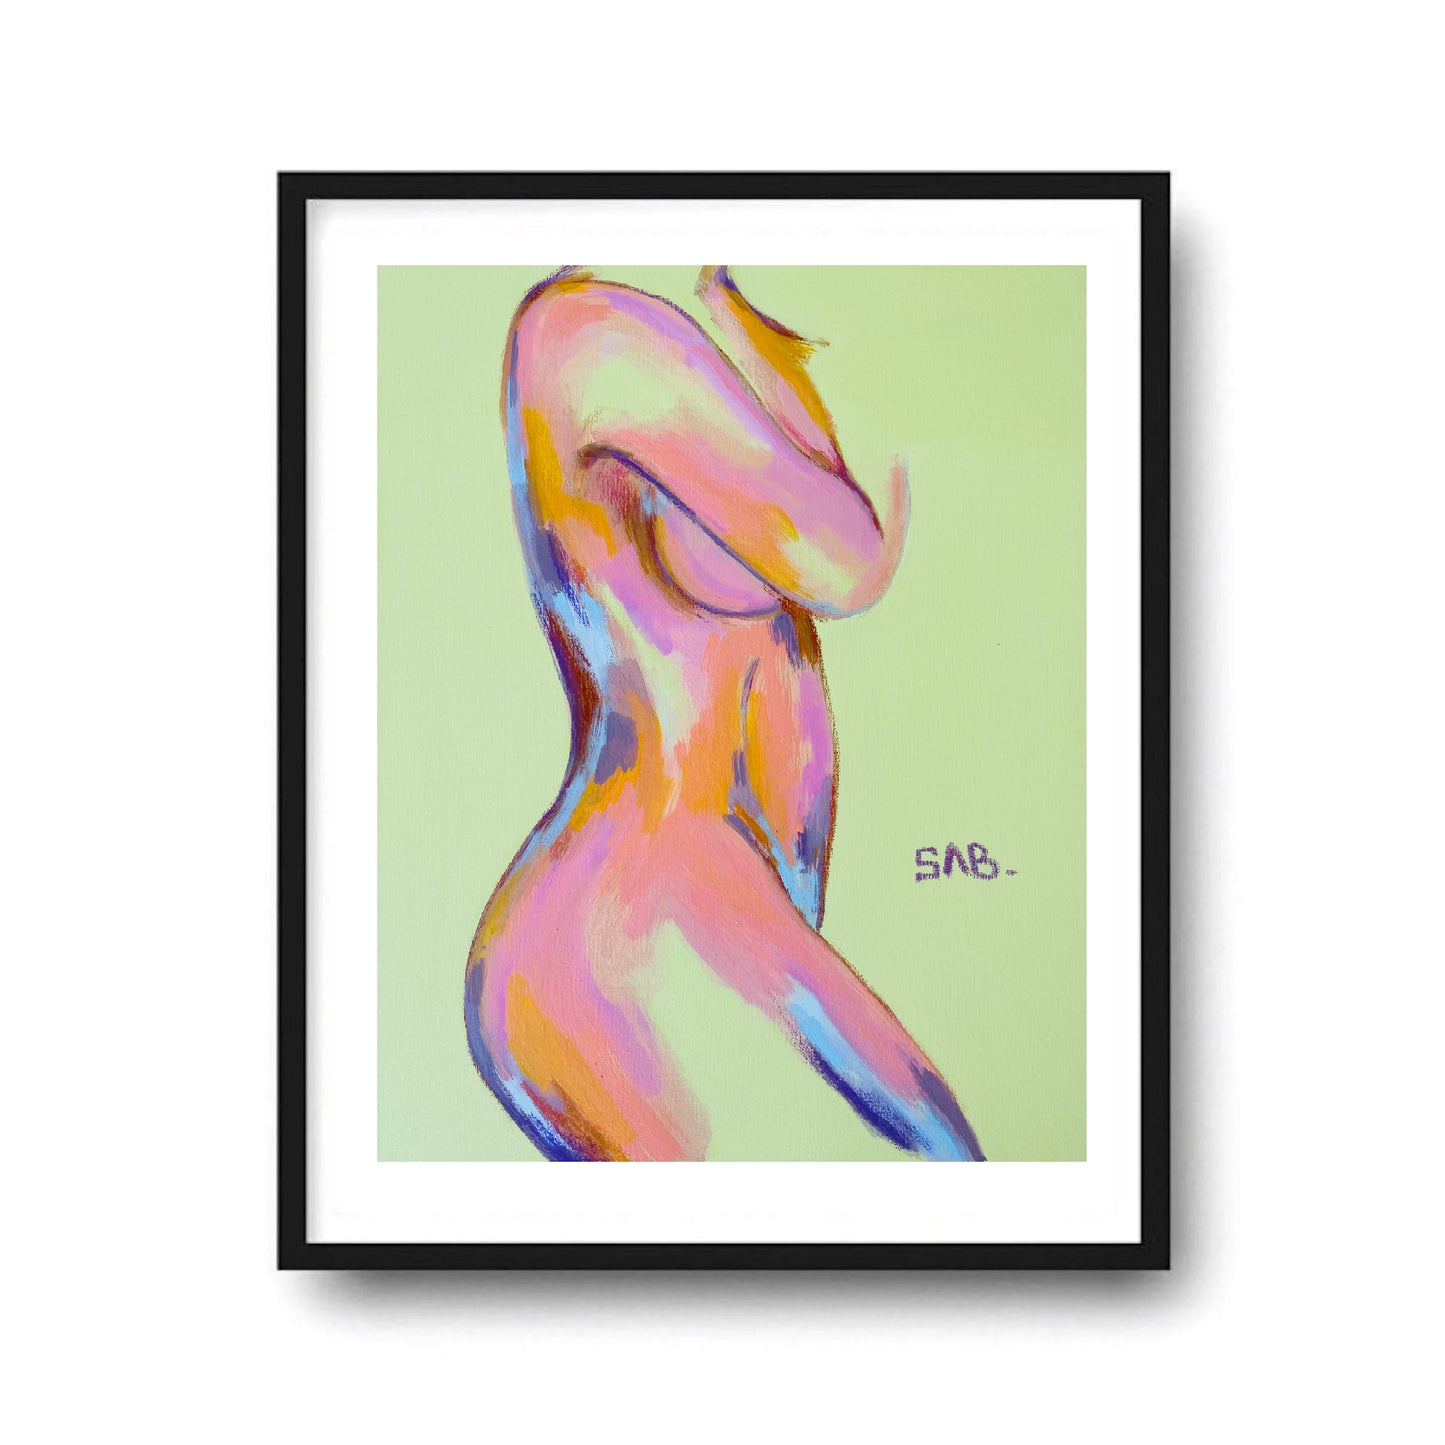 “S” abstract figurative female body painting print